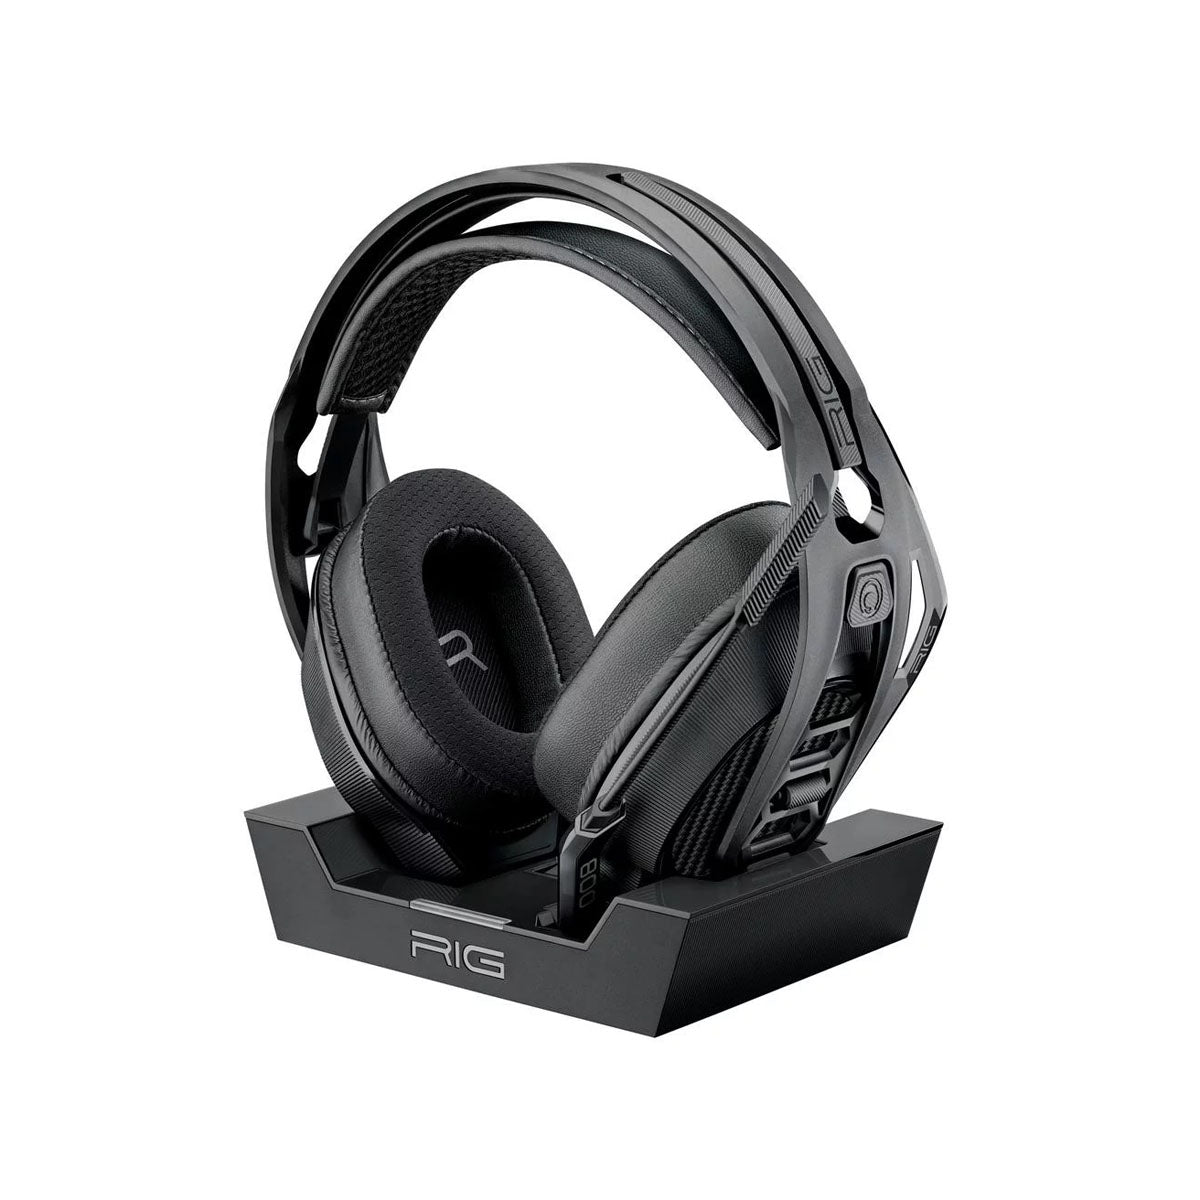 Rig 800 Pro HS Gaming Headset For PlayStation 4 and PlayStation 5.